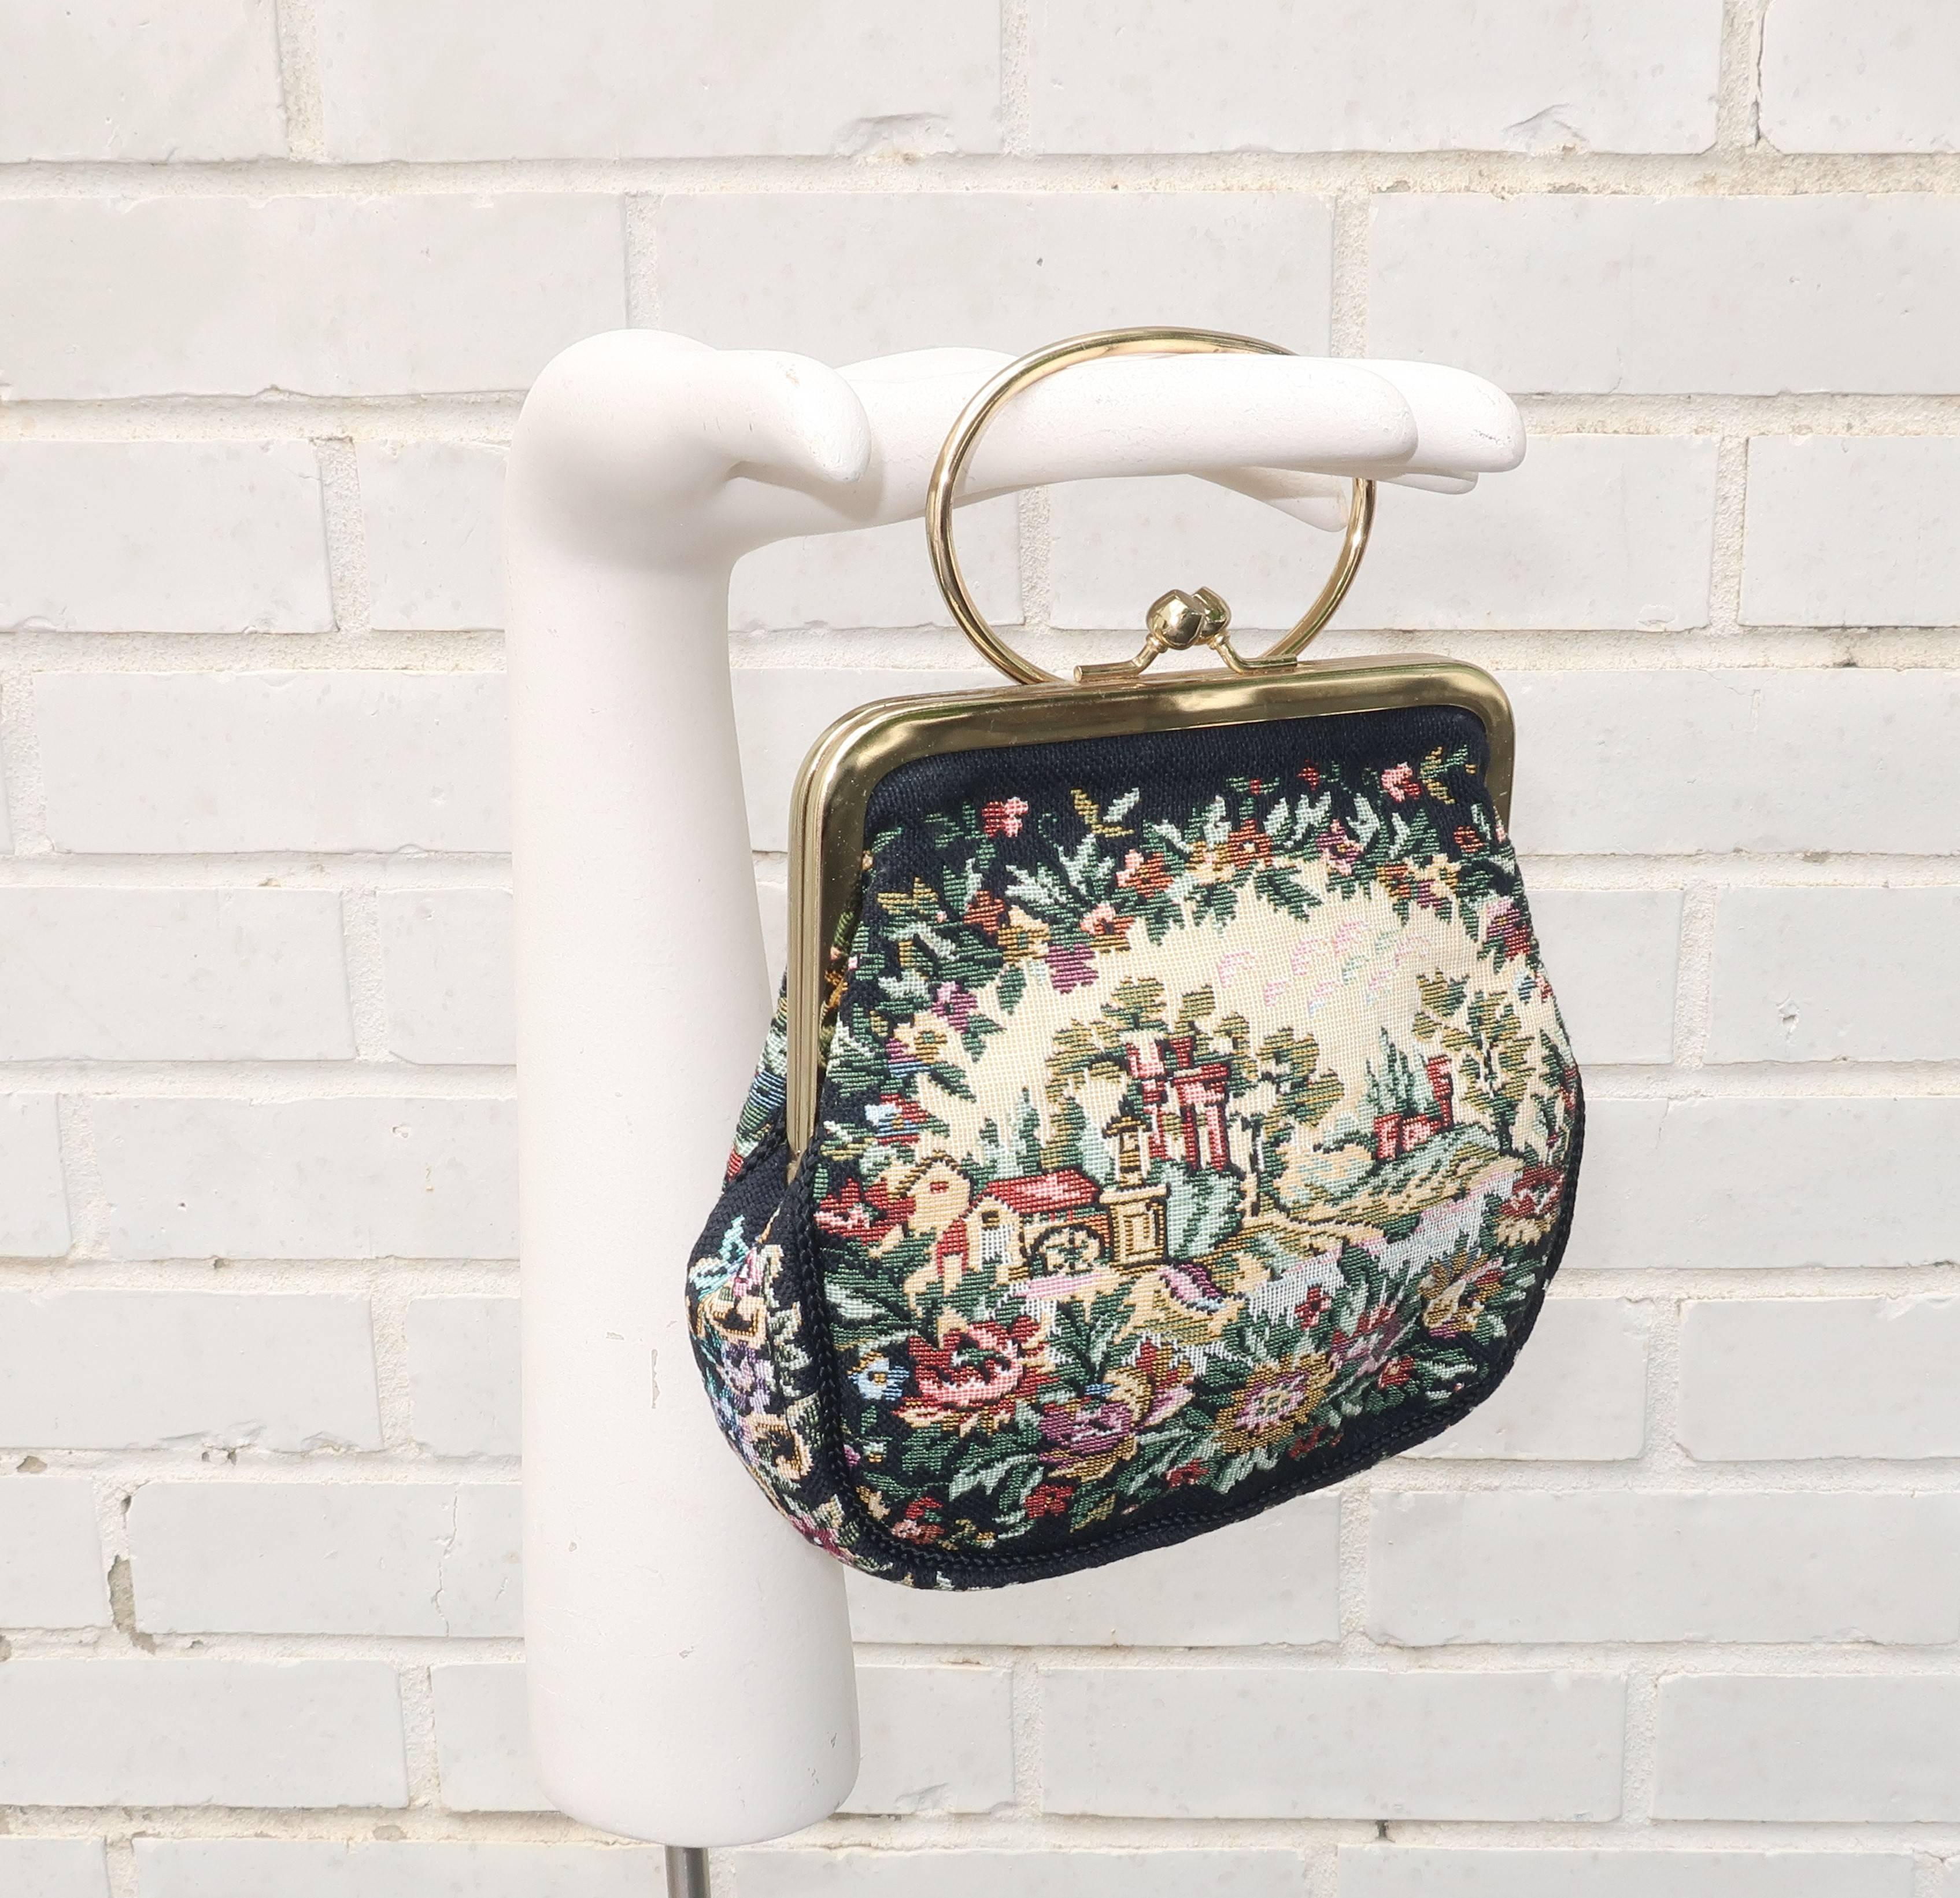  Hilde Walborg founded her company in the 1940's and produced classically styled handbags that offered a little something different for a special occasion.  This charming tapestry bag features a vibrant bucolic scene incorporating shades of beige,